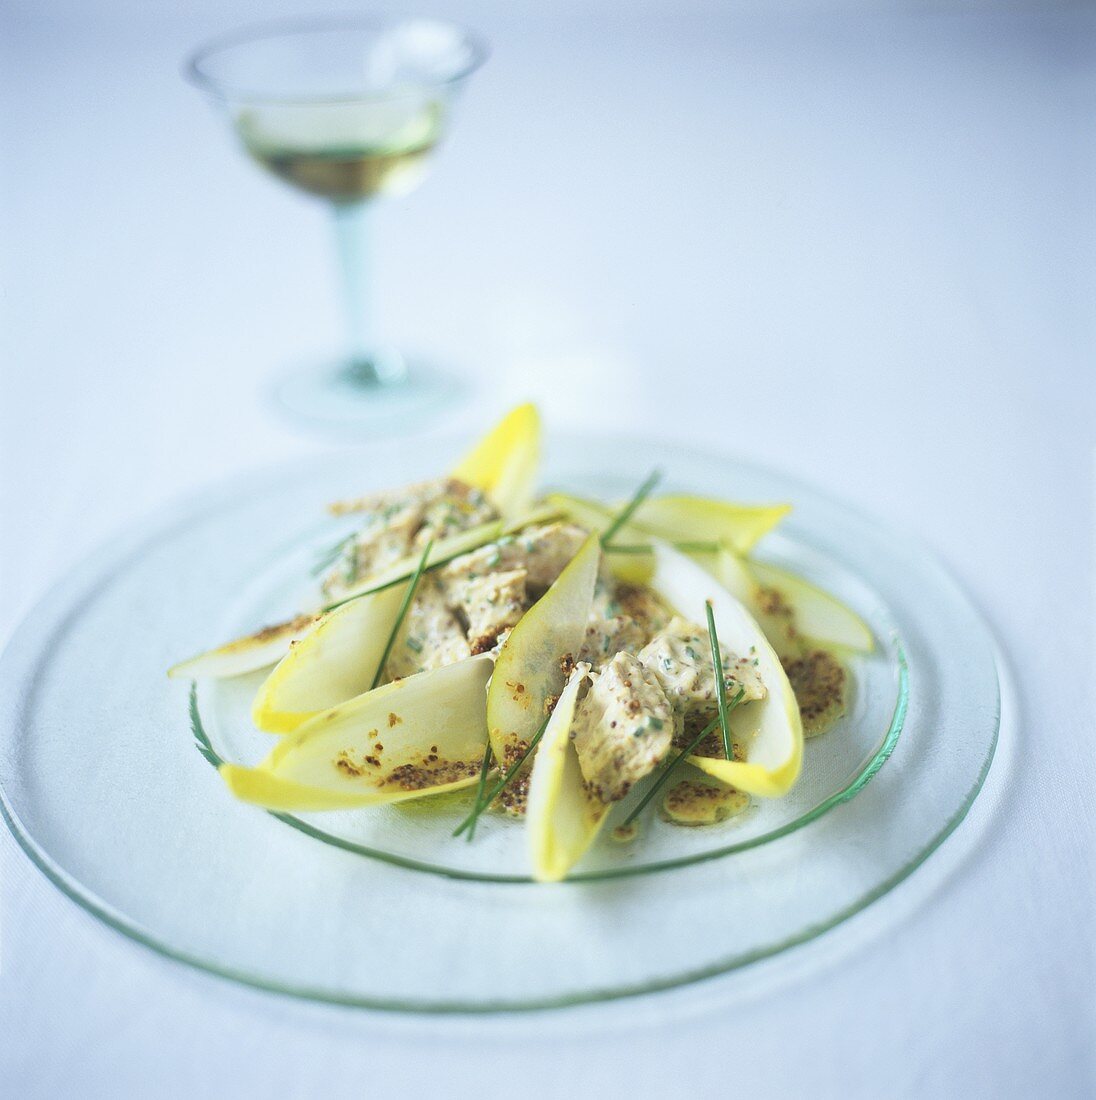 Chicken salad with mustard dressing on chicory